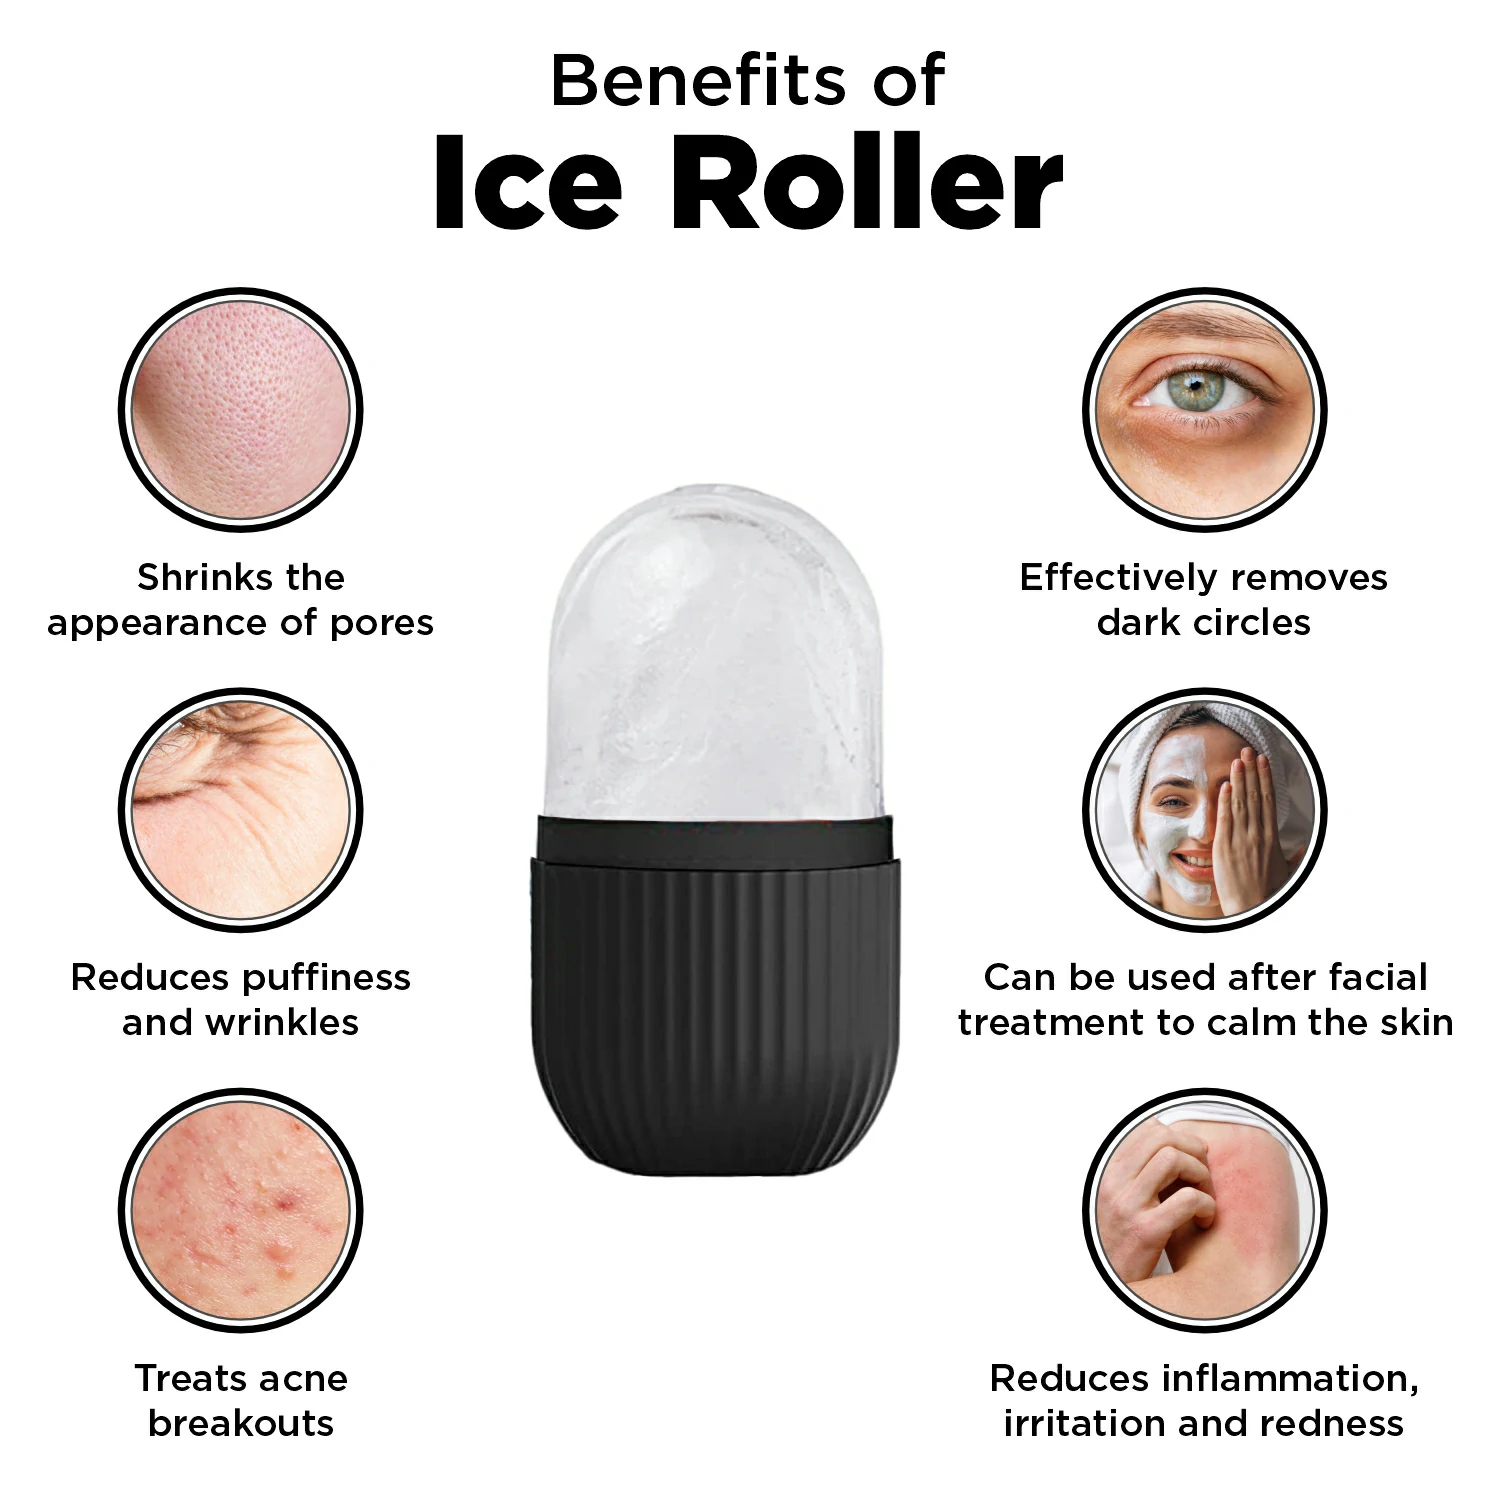 Benefits for Ice Roller